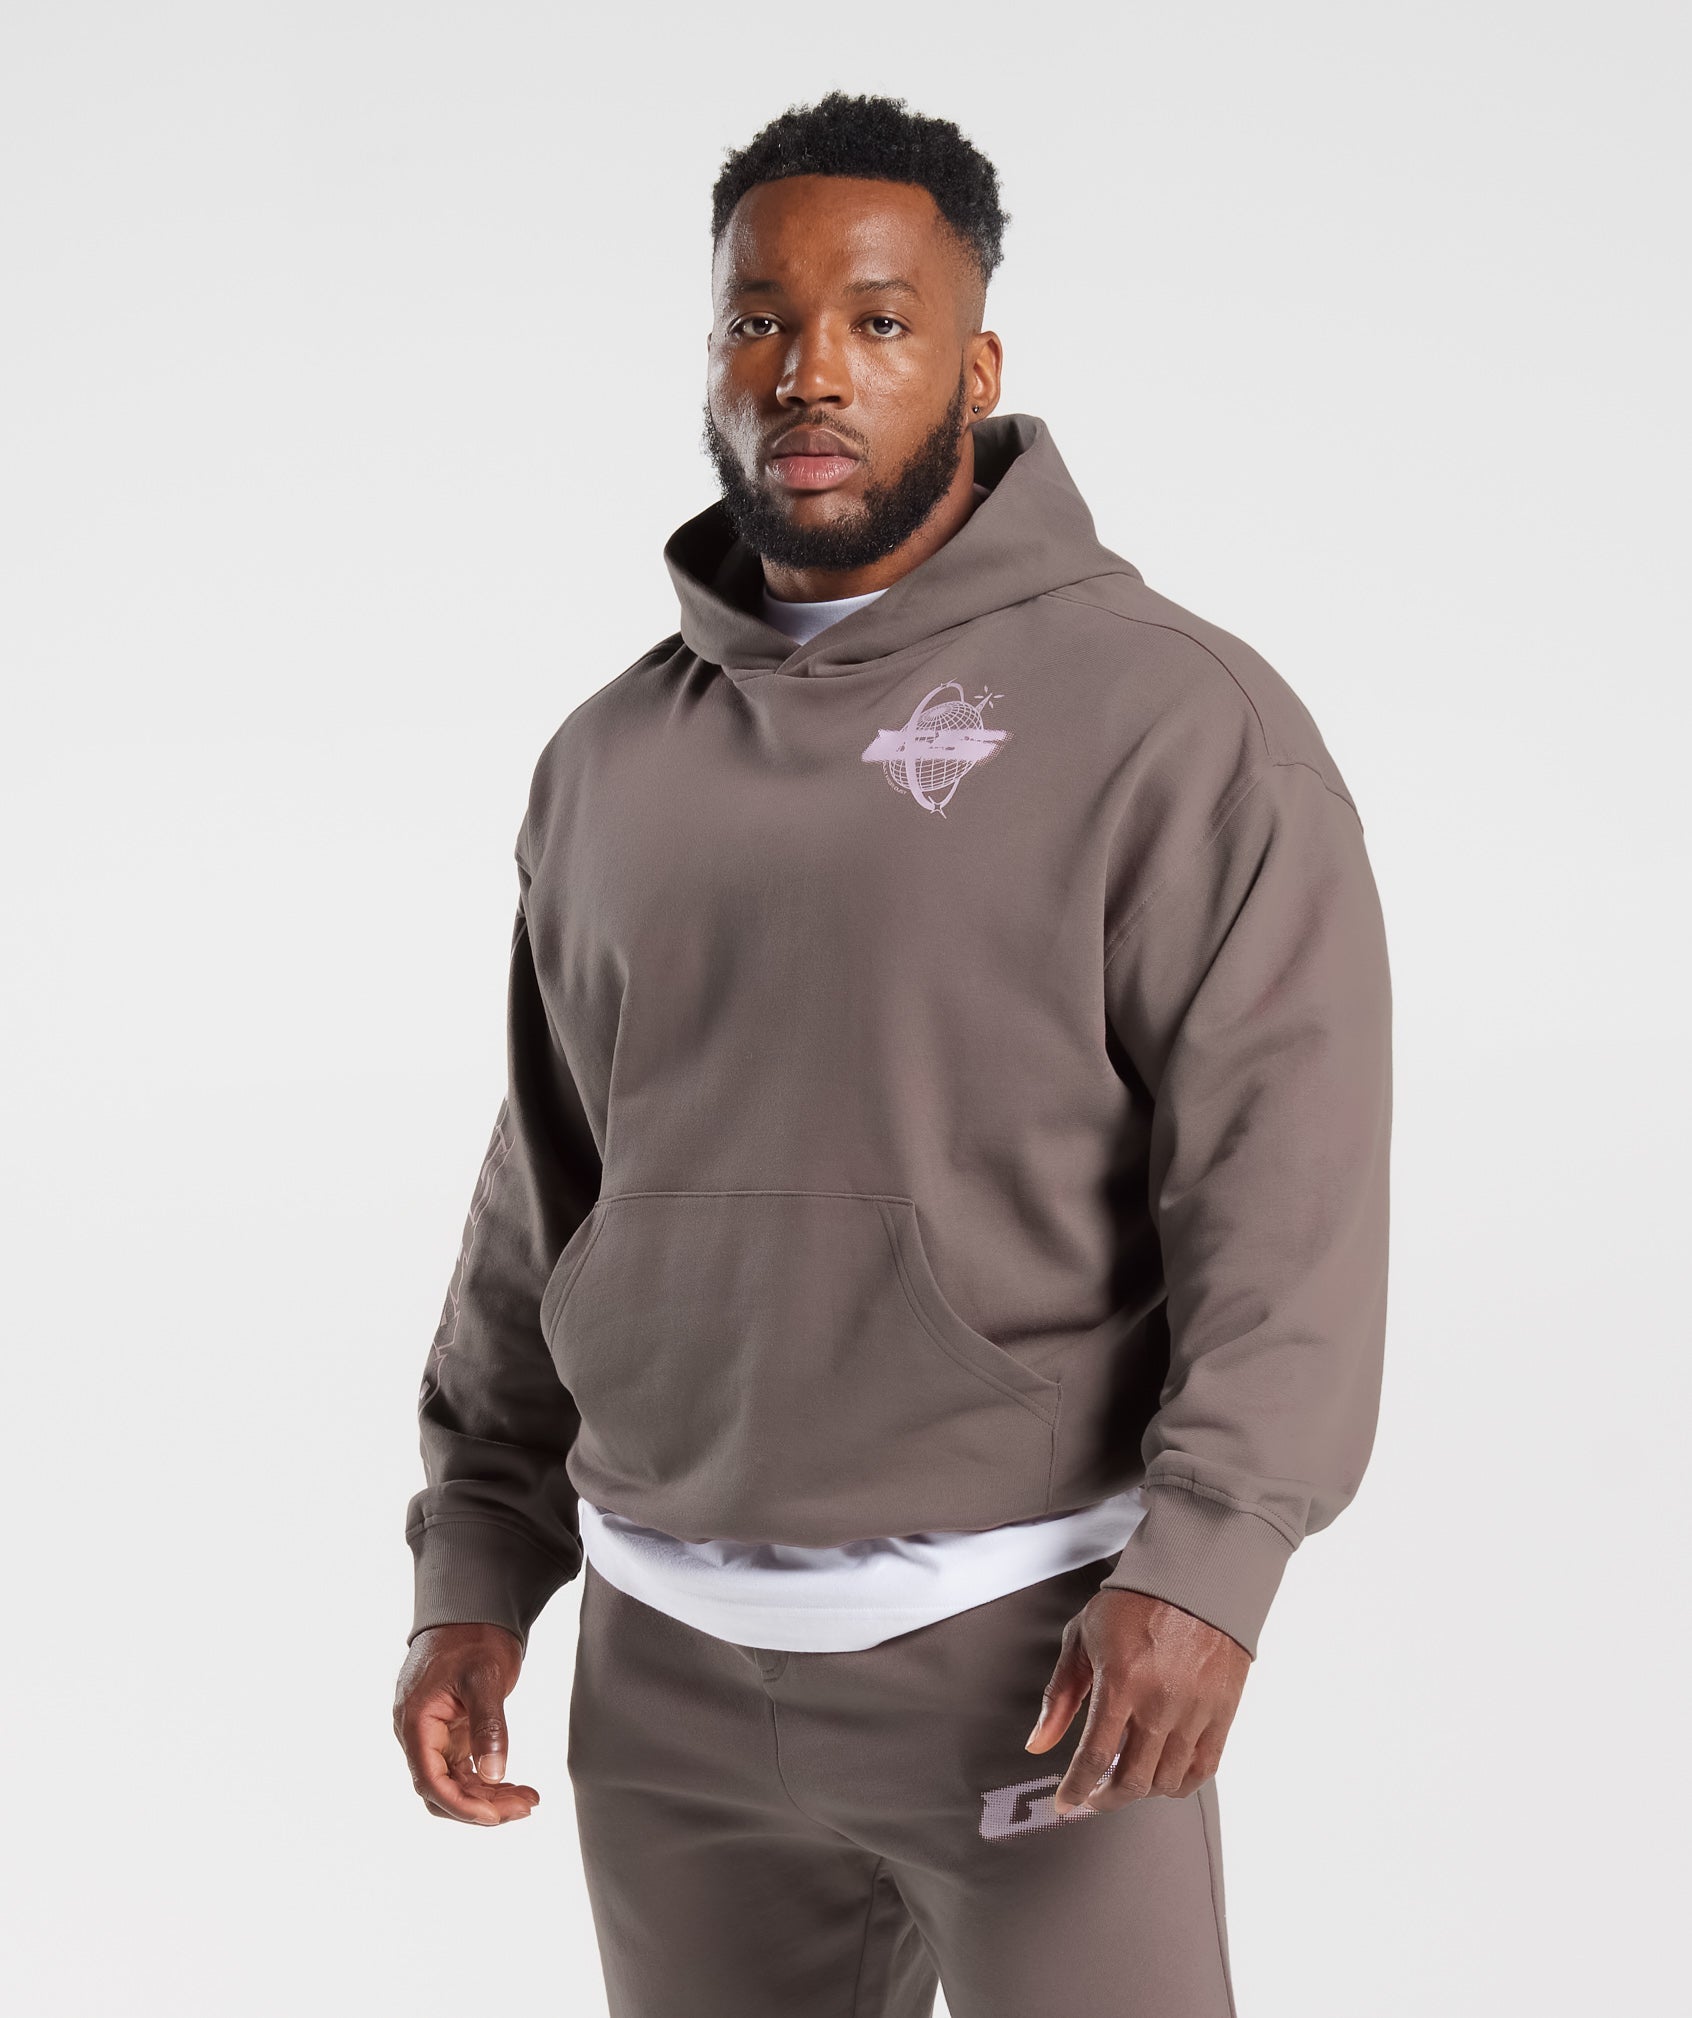 Intergalactic Lifting Hoodie in Walnut Mauve - view 3